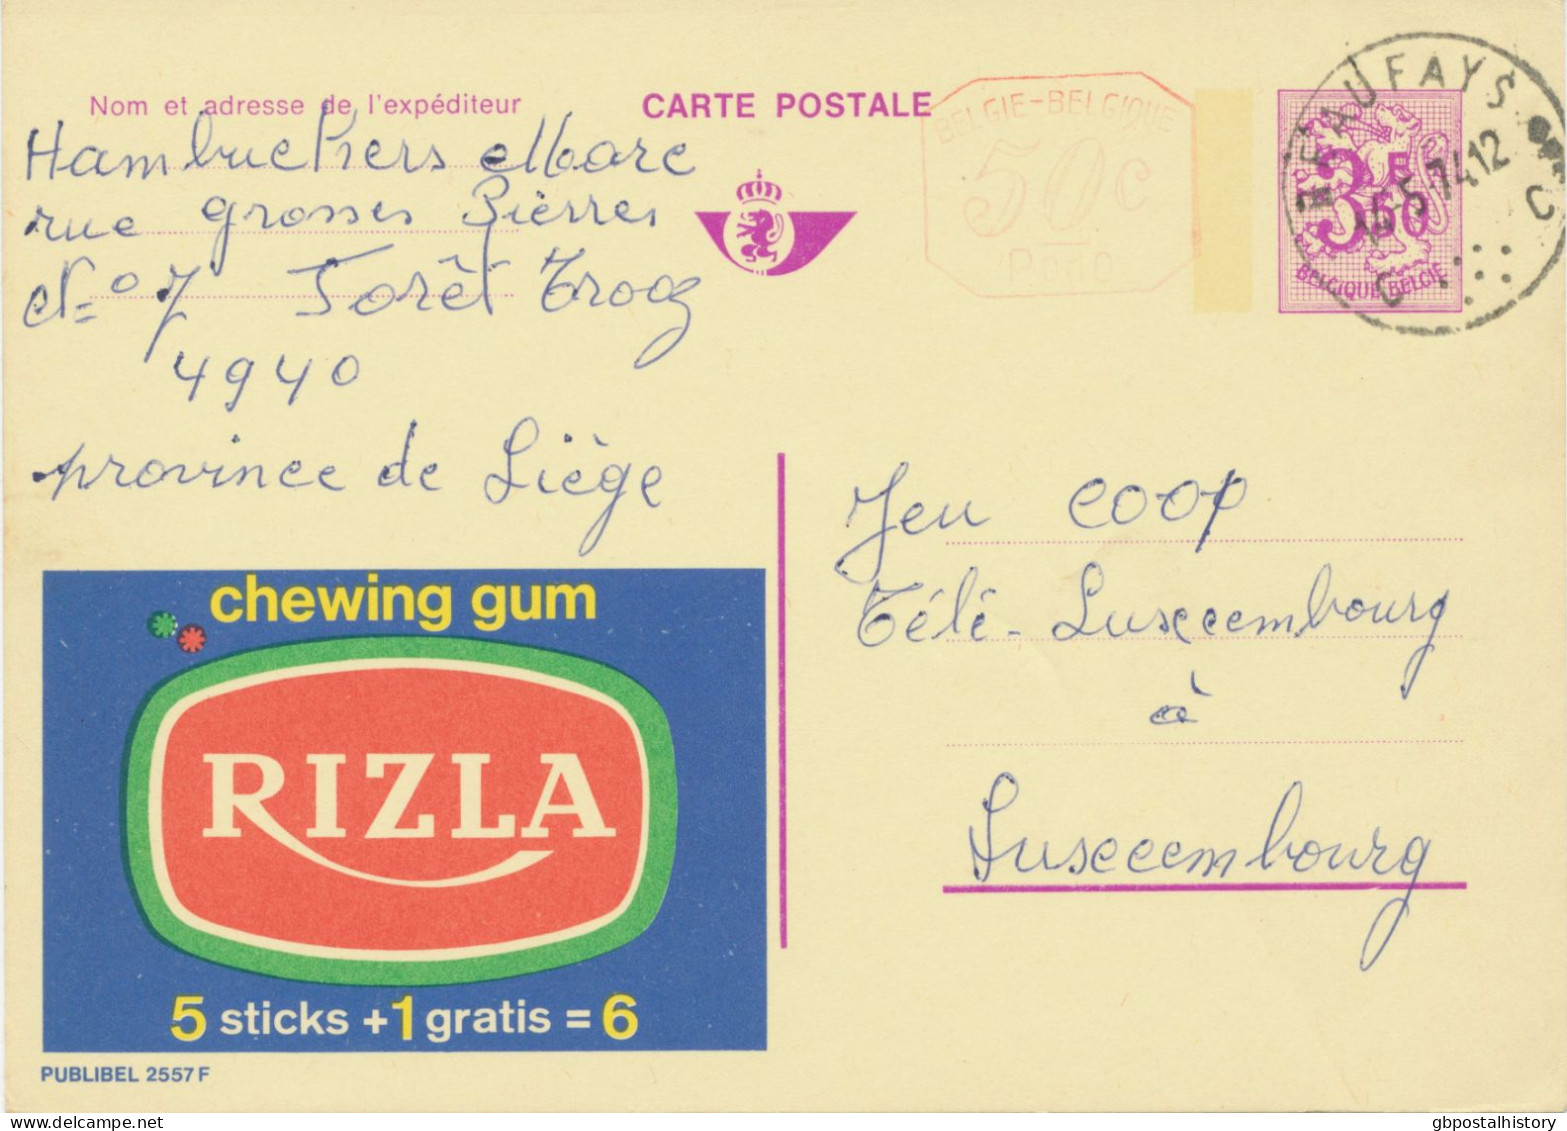 BELGIUM VILLAGE POSTMARKS  BEAUFAYS C (now Chaudfontaine) SC With Dots 1974 (Postal Stationery 3,50 + 0,50 F, PUBLIBEL 2 - Punktstempel